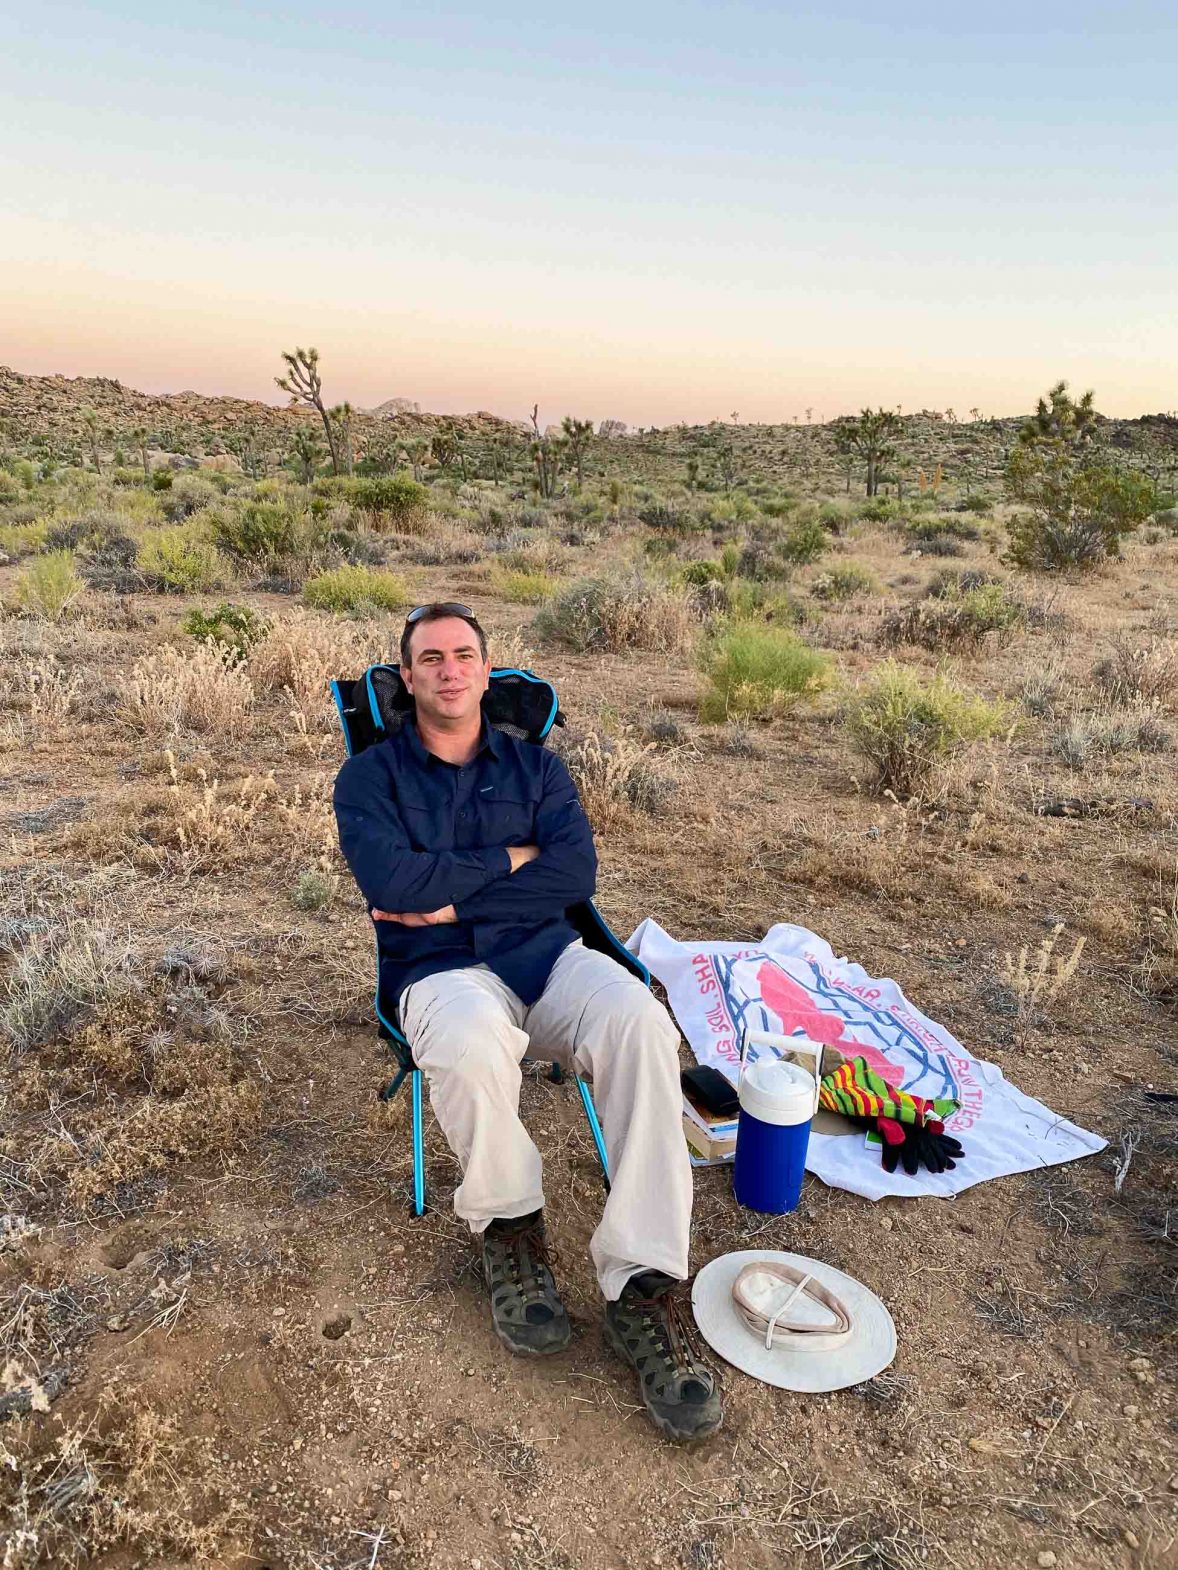 Robby sits in dru terrain with a blanket beside him with some snacks on it.